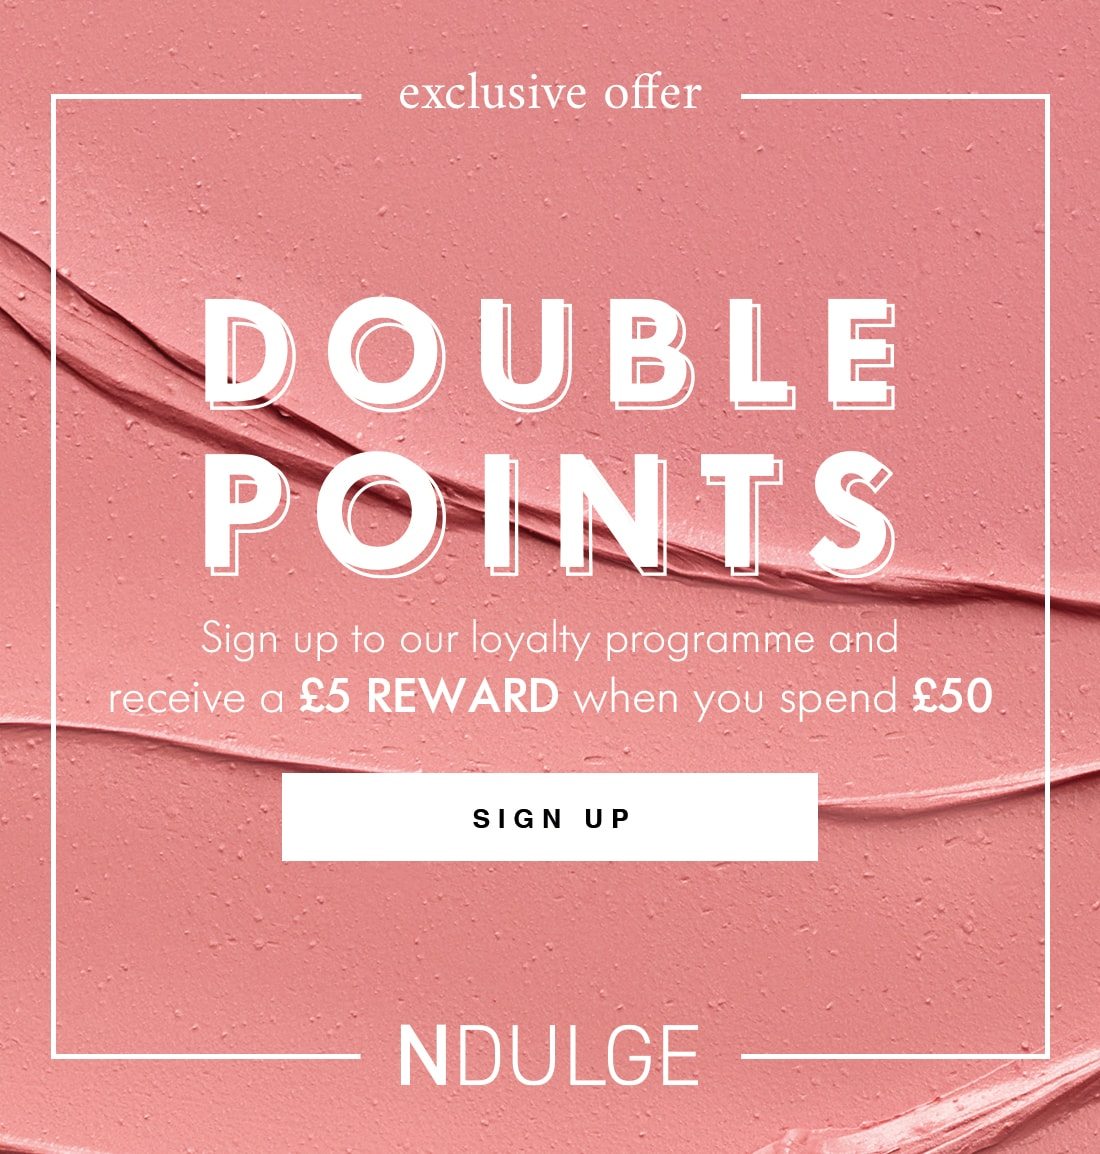 exclusive offer DOUBLE POINTS Sign up to our loyalty programme and receive a £5 REWARD when you spend £50 SIGN UP